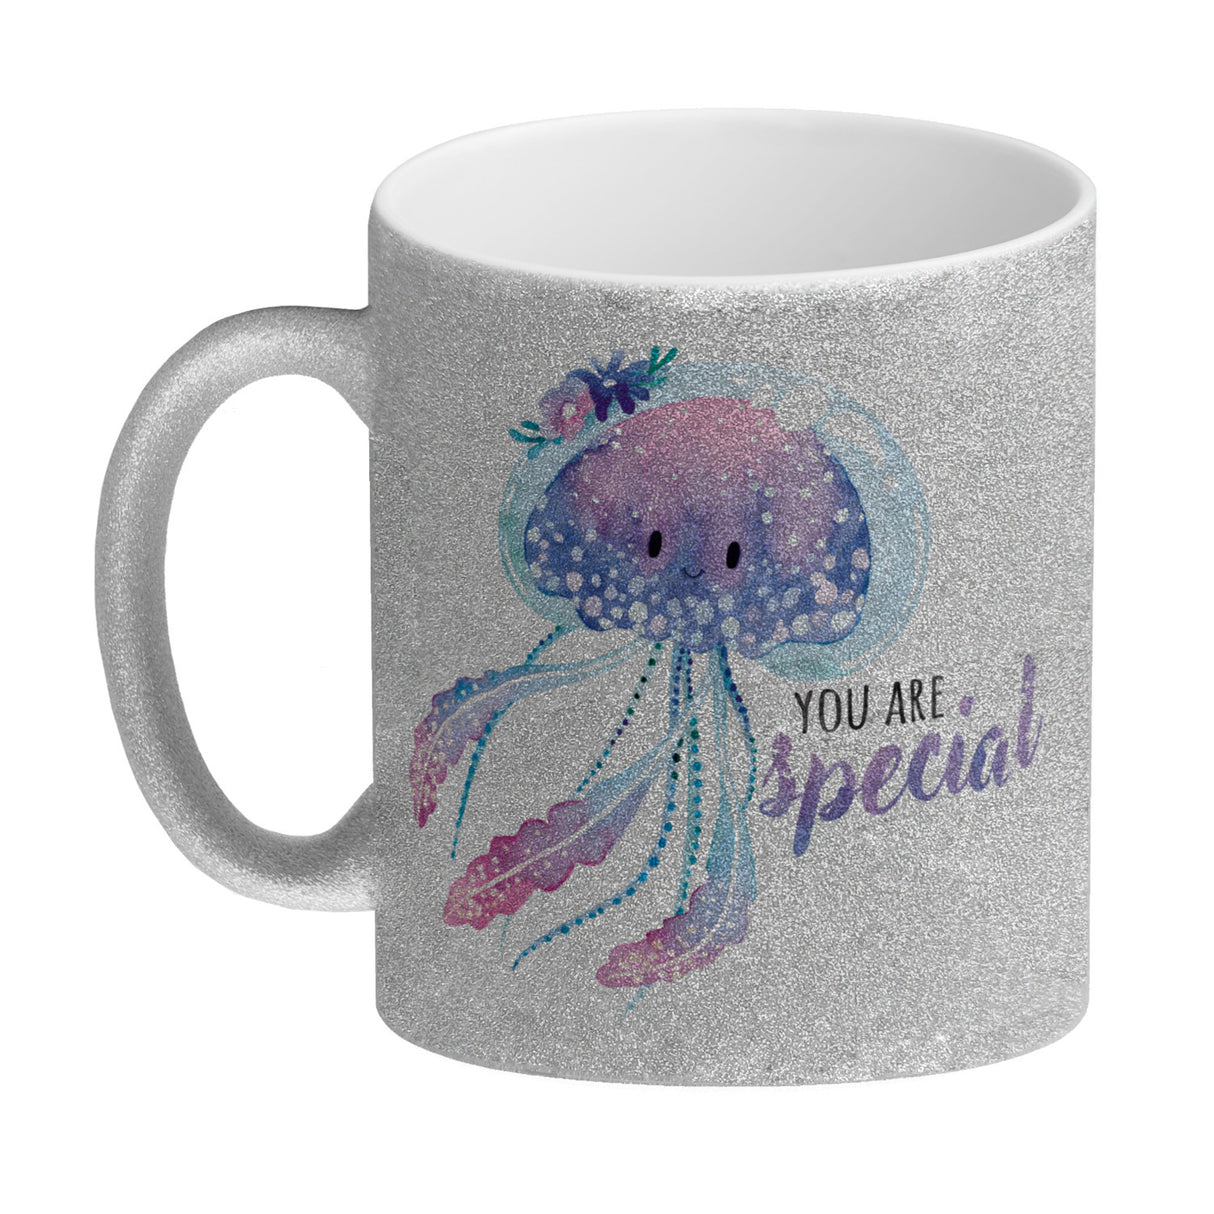 Qualle Kaffeebecher mit Spruch You are special